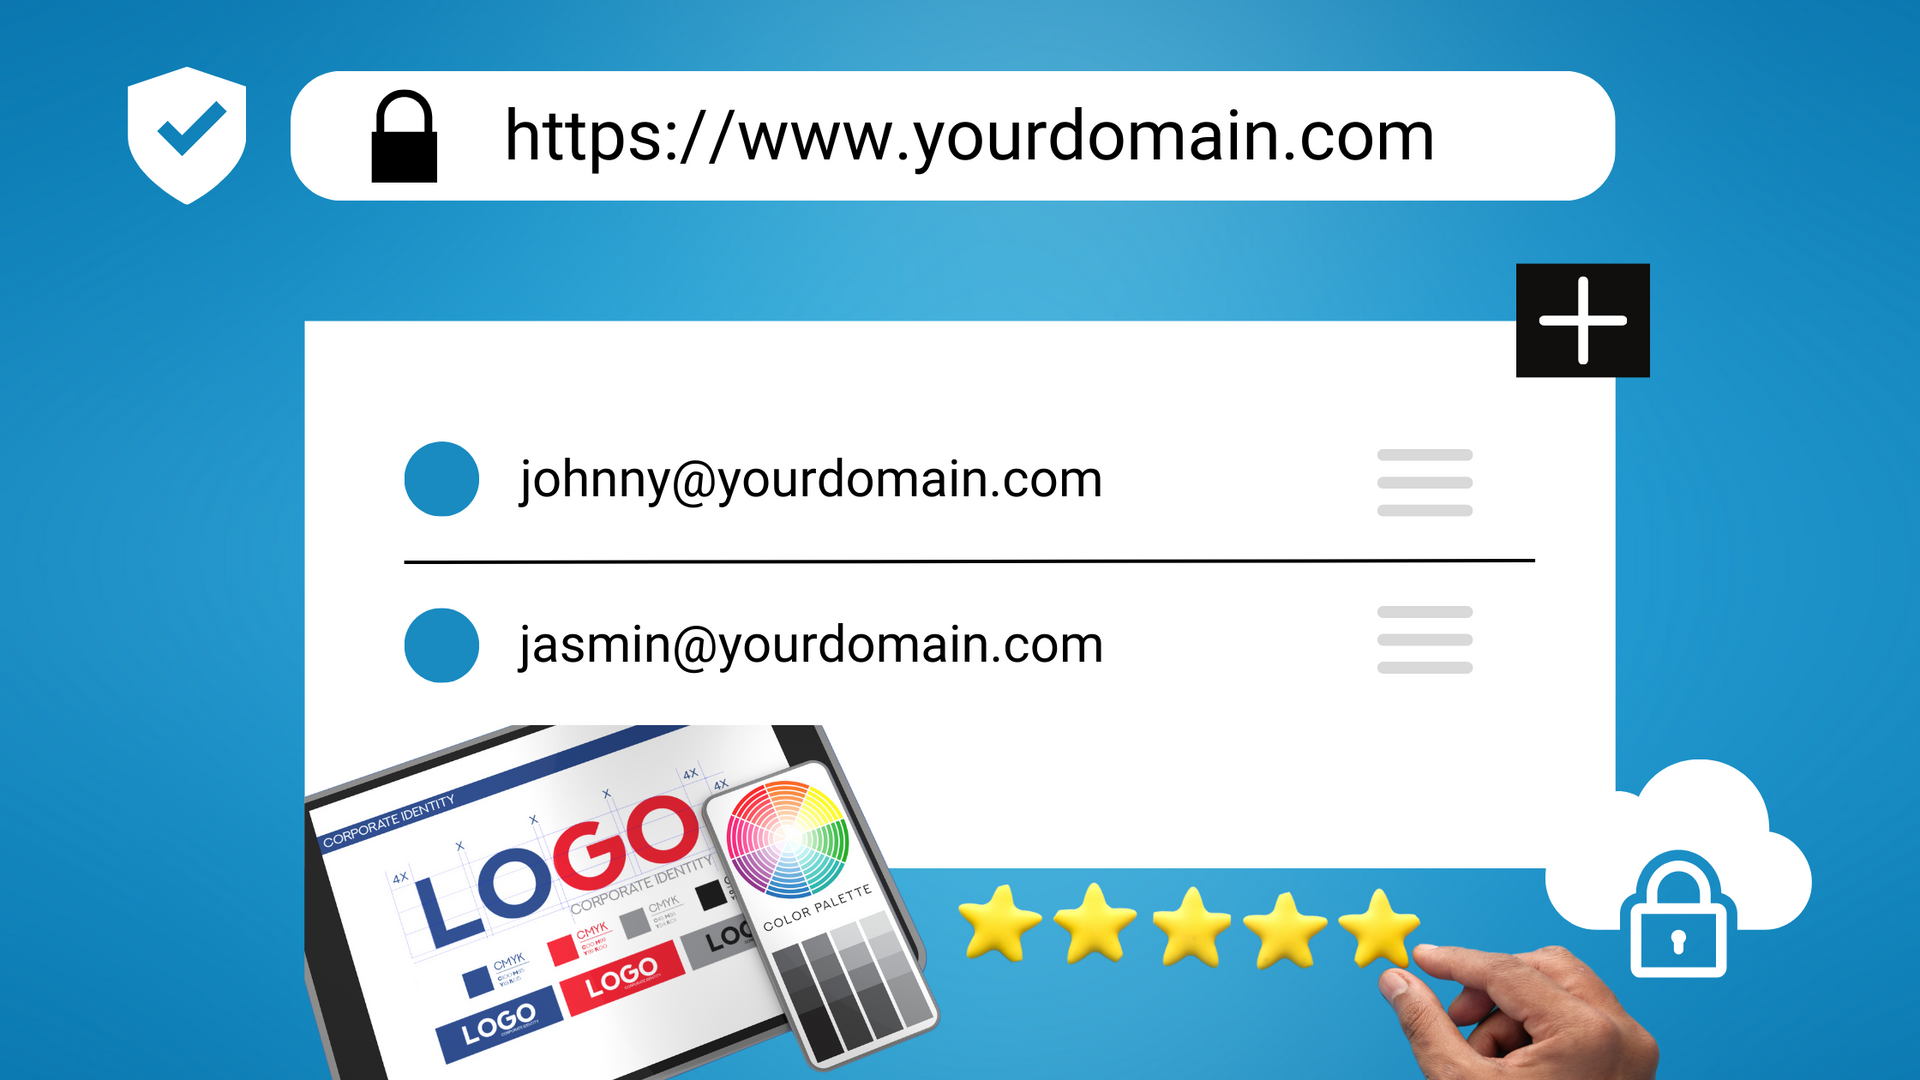 A person is pointing at a website that says https://www.yourdomain.com